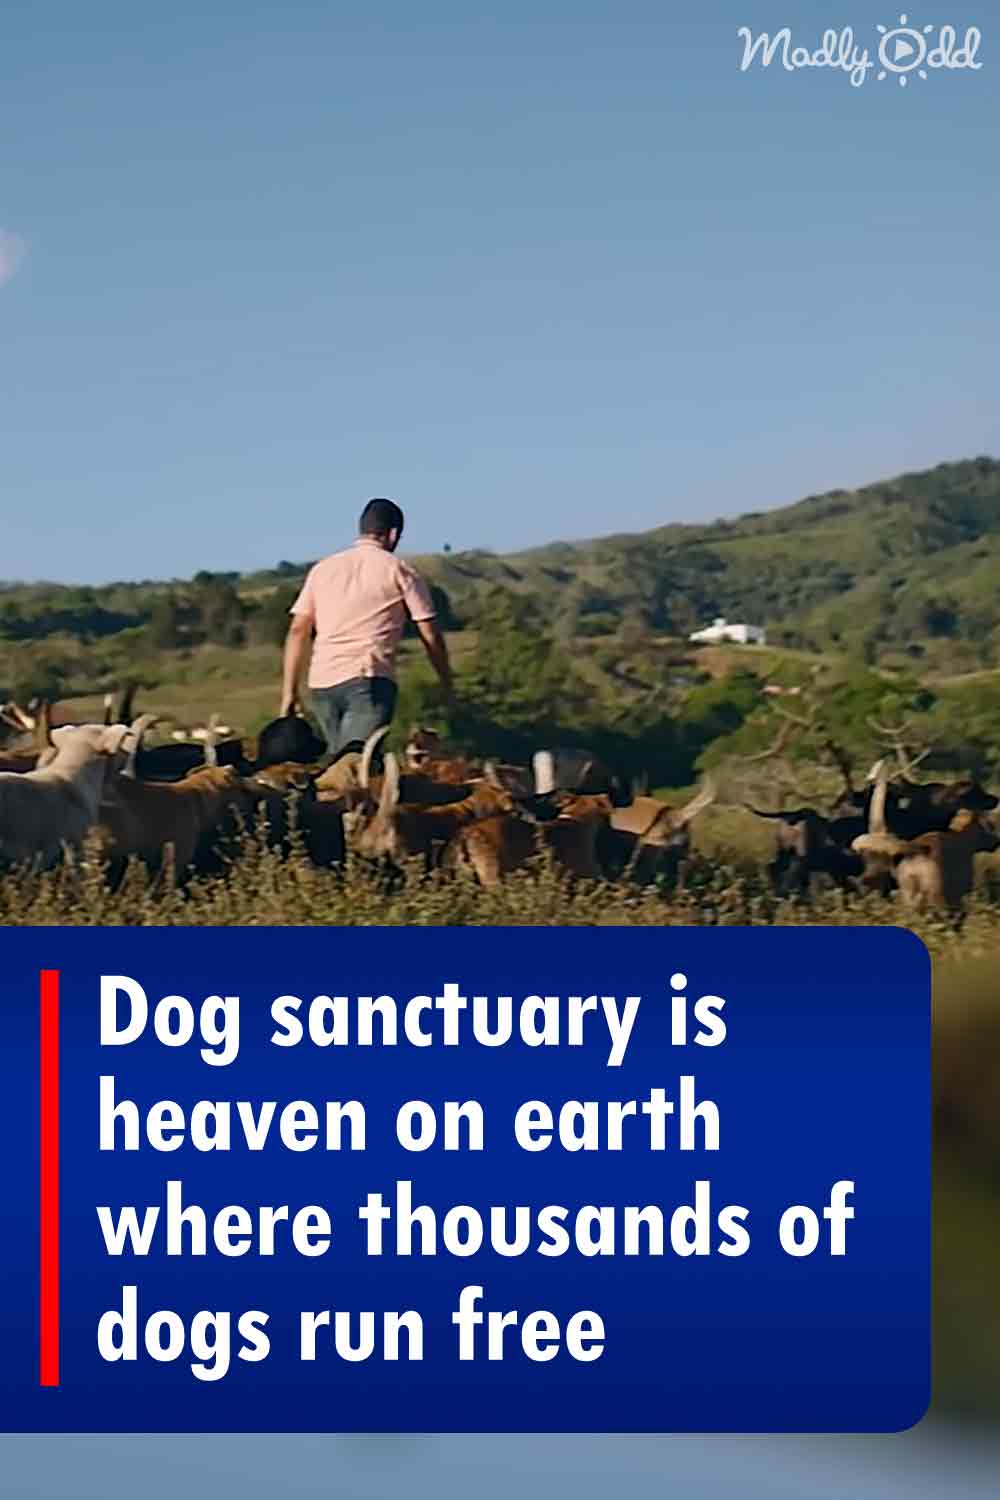 Dog sanctuary is heaven on earth where thousands of dogs run free